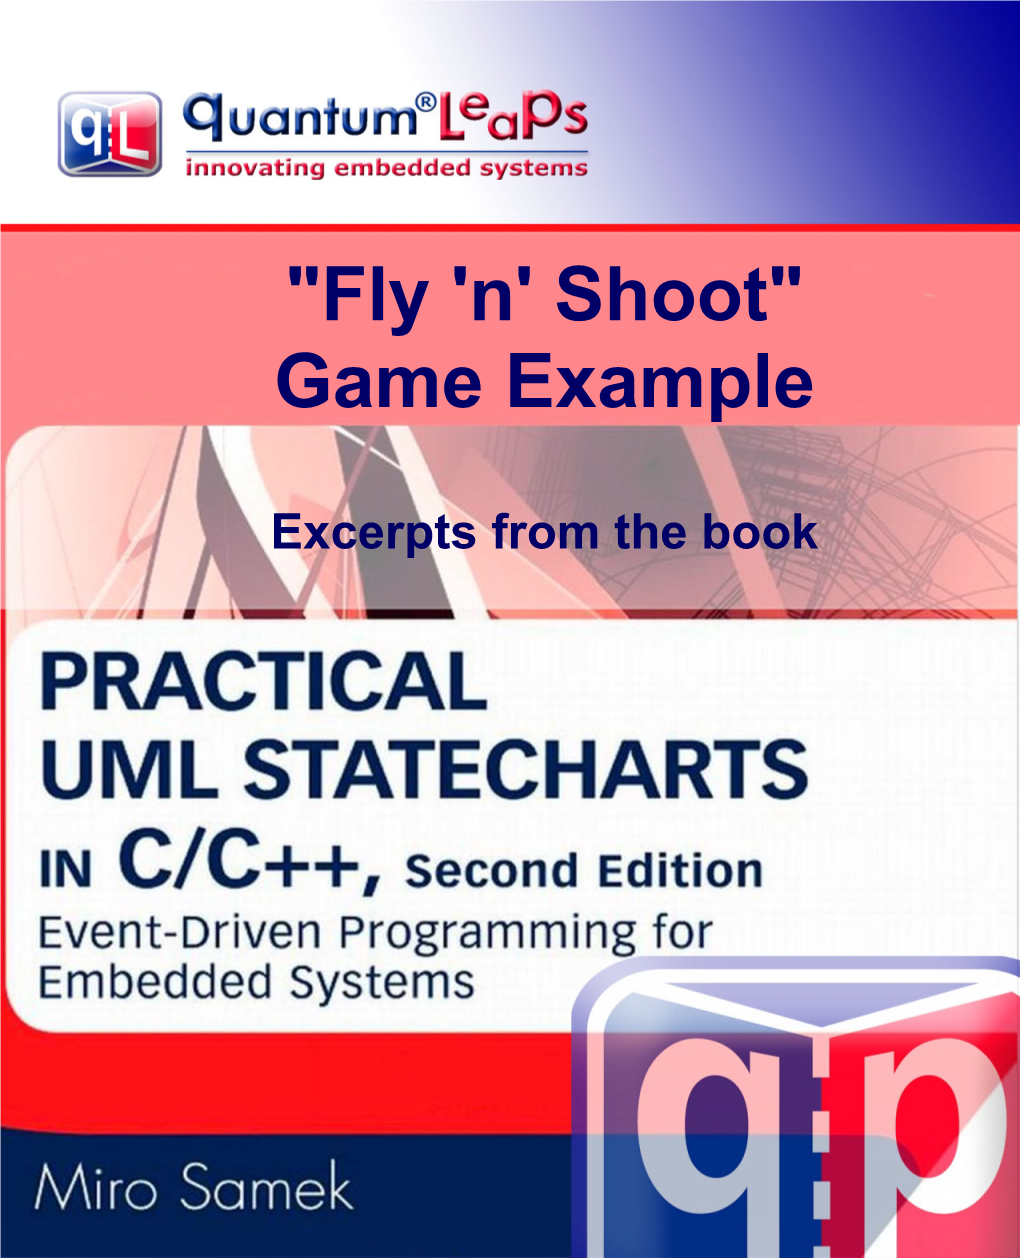 Application Note: Fly 'N' Shoot Game Example